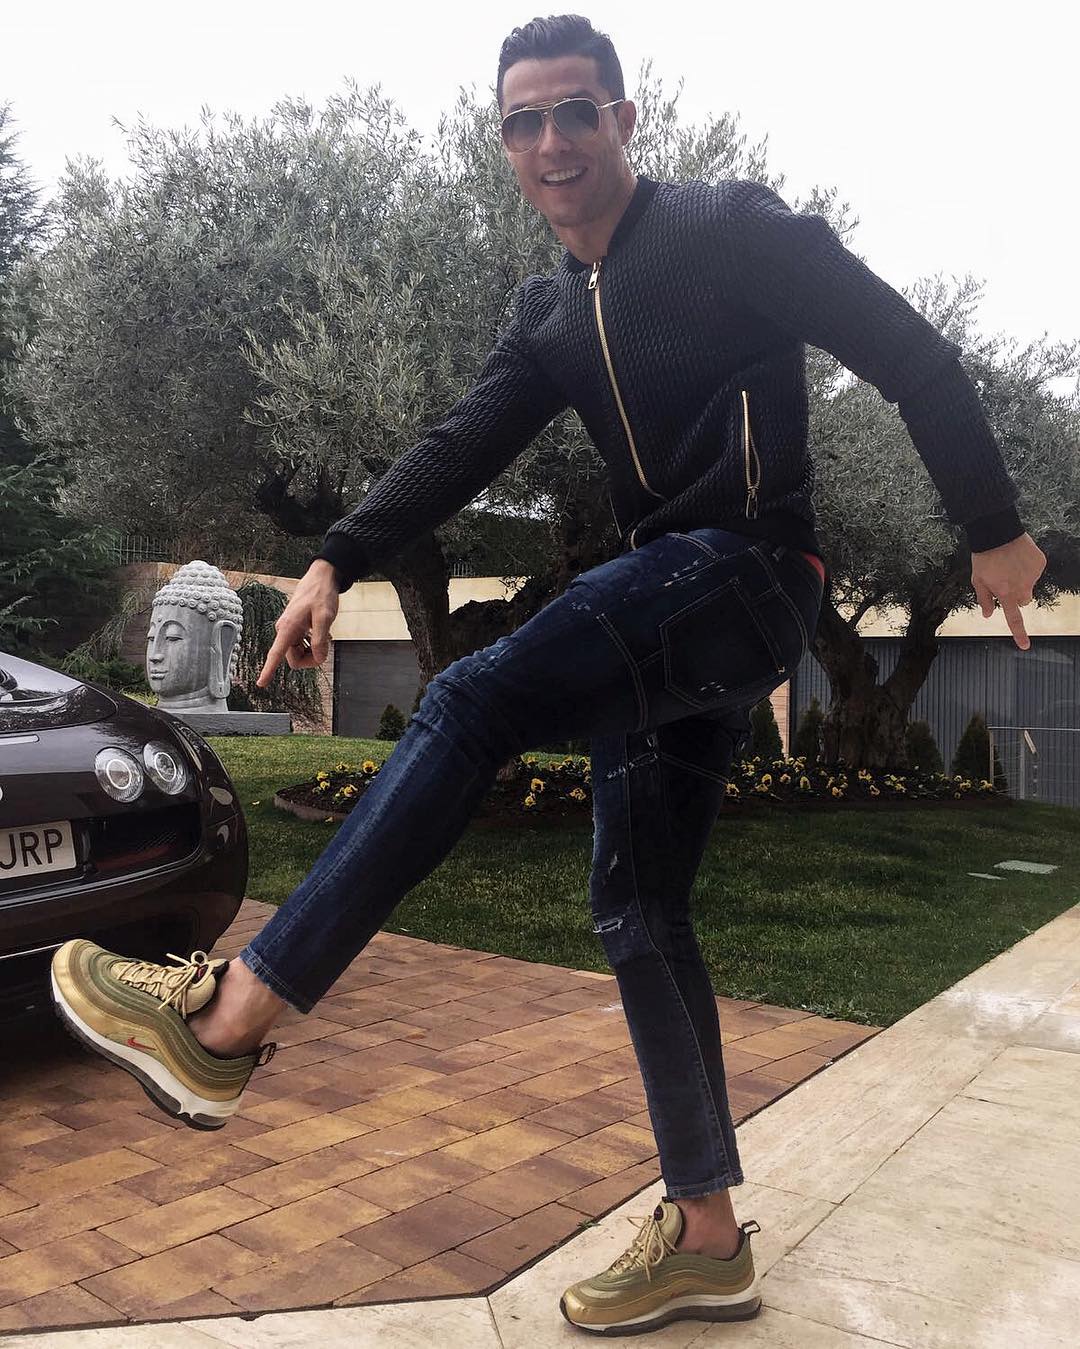 SPOTTED: Cristian Ronaldo In Dolce & Gabbana Jacket And Nike Air Max 97 Sneakers